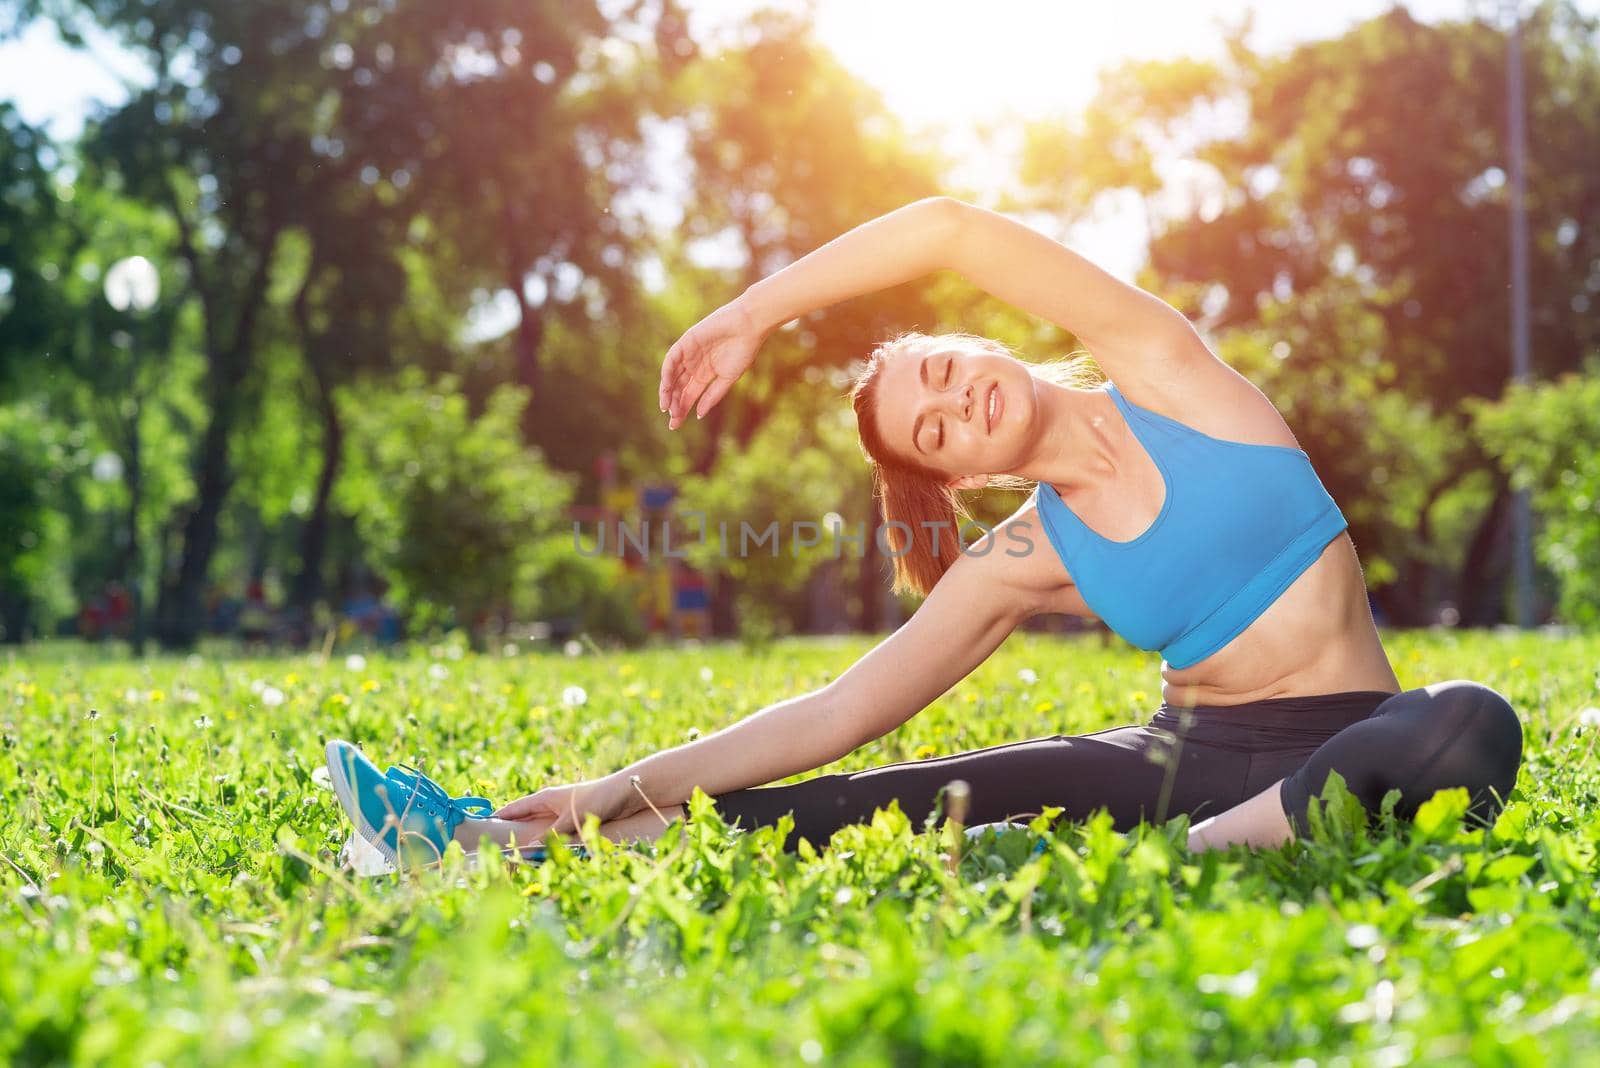 Attractive girl in sportswear doing yoga in park. Young woman sitting in yoga pose on green grass. Sport training outdoor at sunny summer day. Morning stretching exercises and healthy lifestyle.